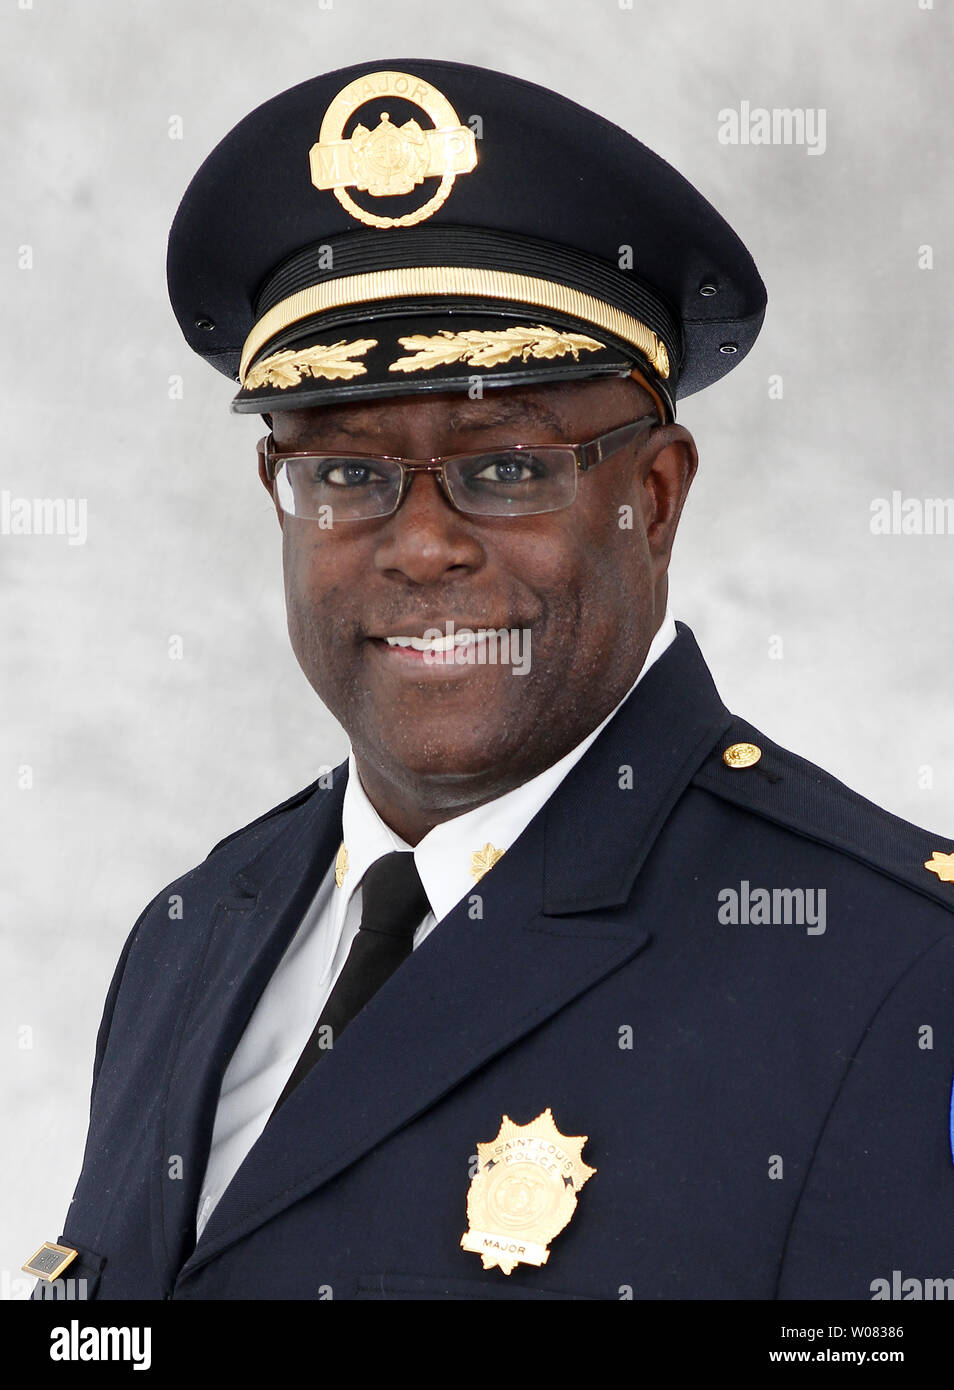 The St. Louis Police Department has promoted Col. John Hayden to the rank of Police Chief, in St. Louis on December 28, 2017. Hayden, a 30-year veteran of the St. Louis Metropolitan Police Department was born and raised in St. Louis. For the first time in more than 150 years, St. Louis had the opprutunity to pick a police chief from outside of its own department but decided not to.   Photo by St. Louis Metrolpolitian Police Department/UPI Stock Photo